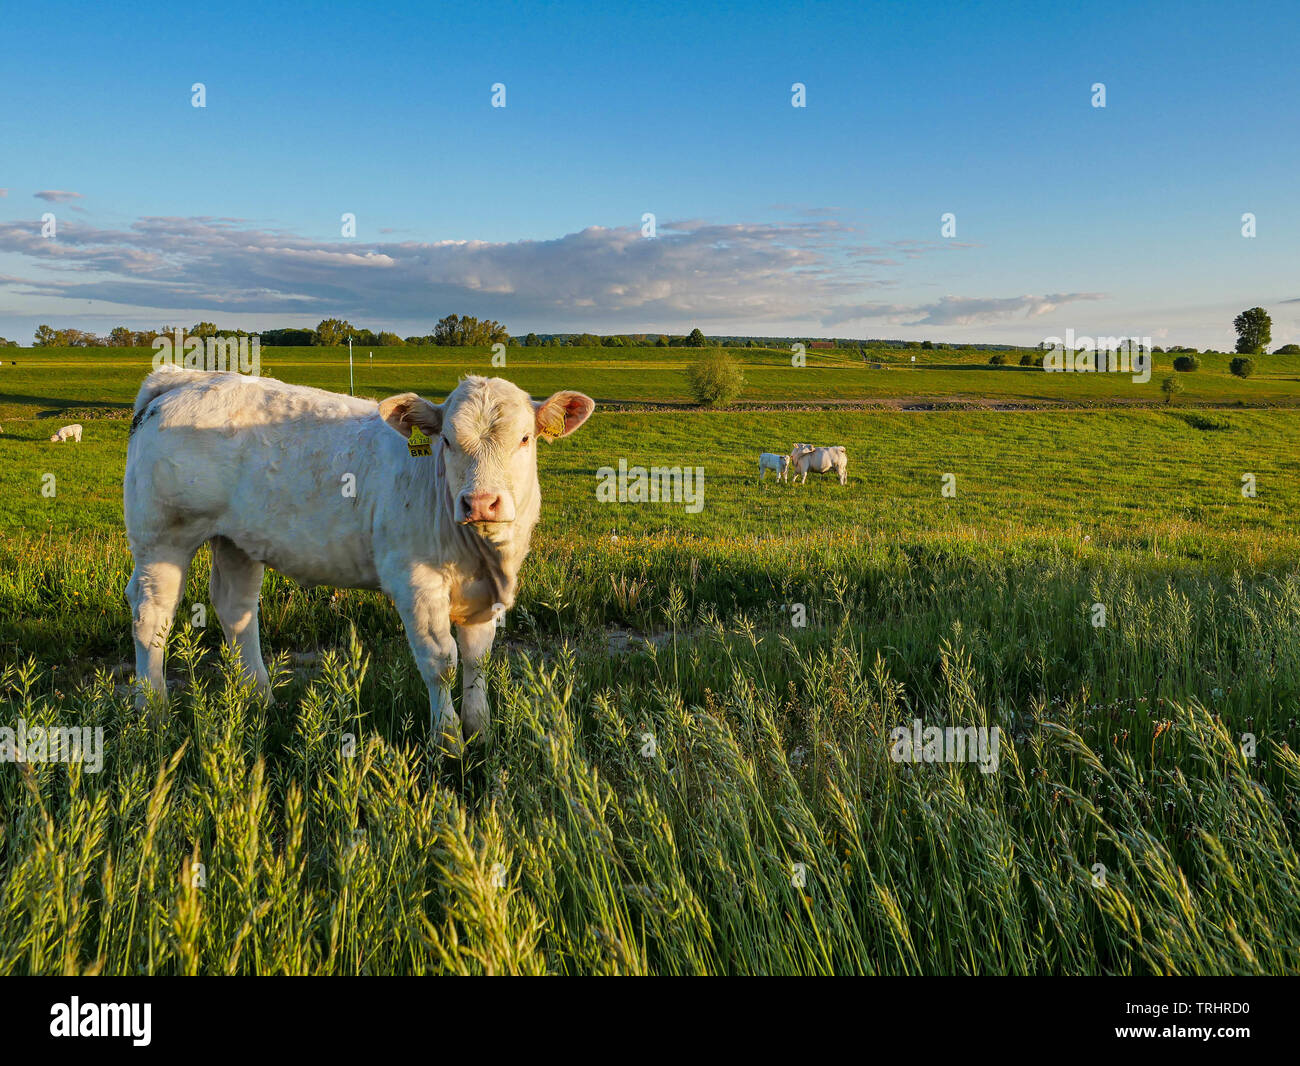 Small white cow looking curiously into the camera on grass green farmland Stock Photo